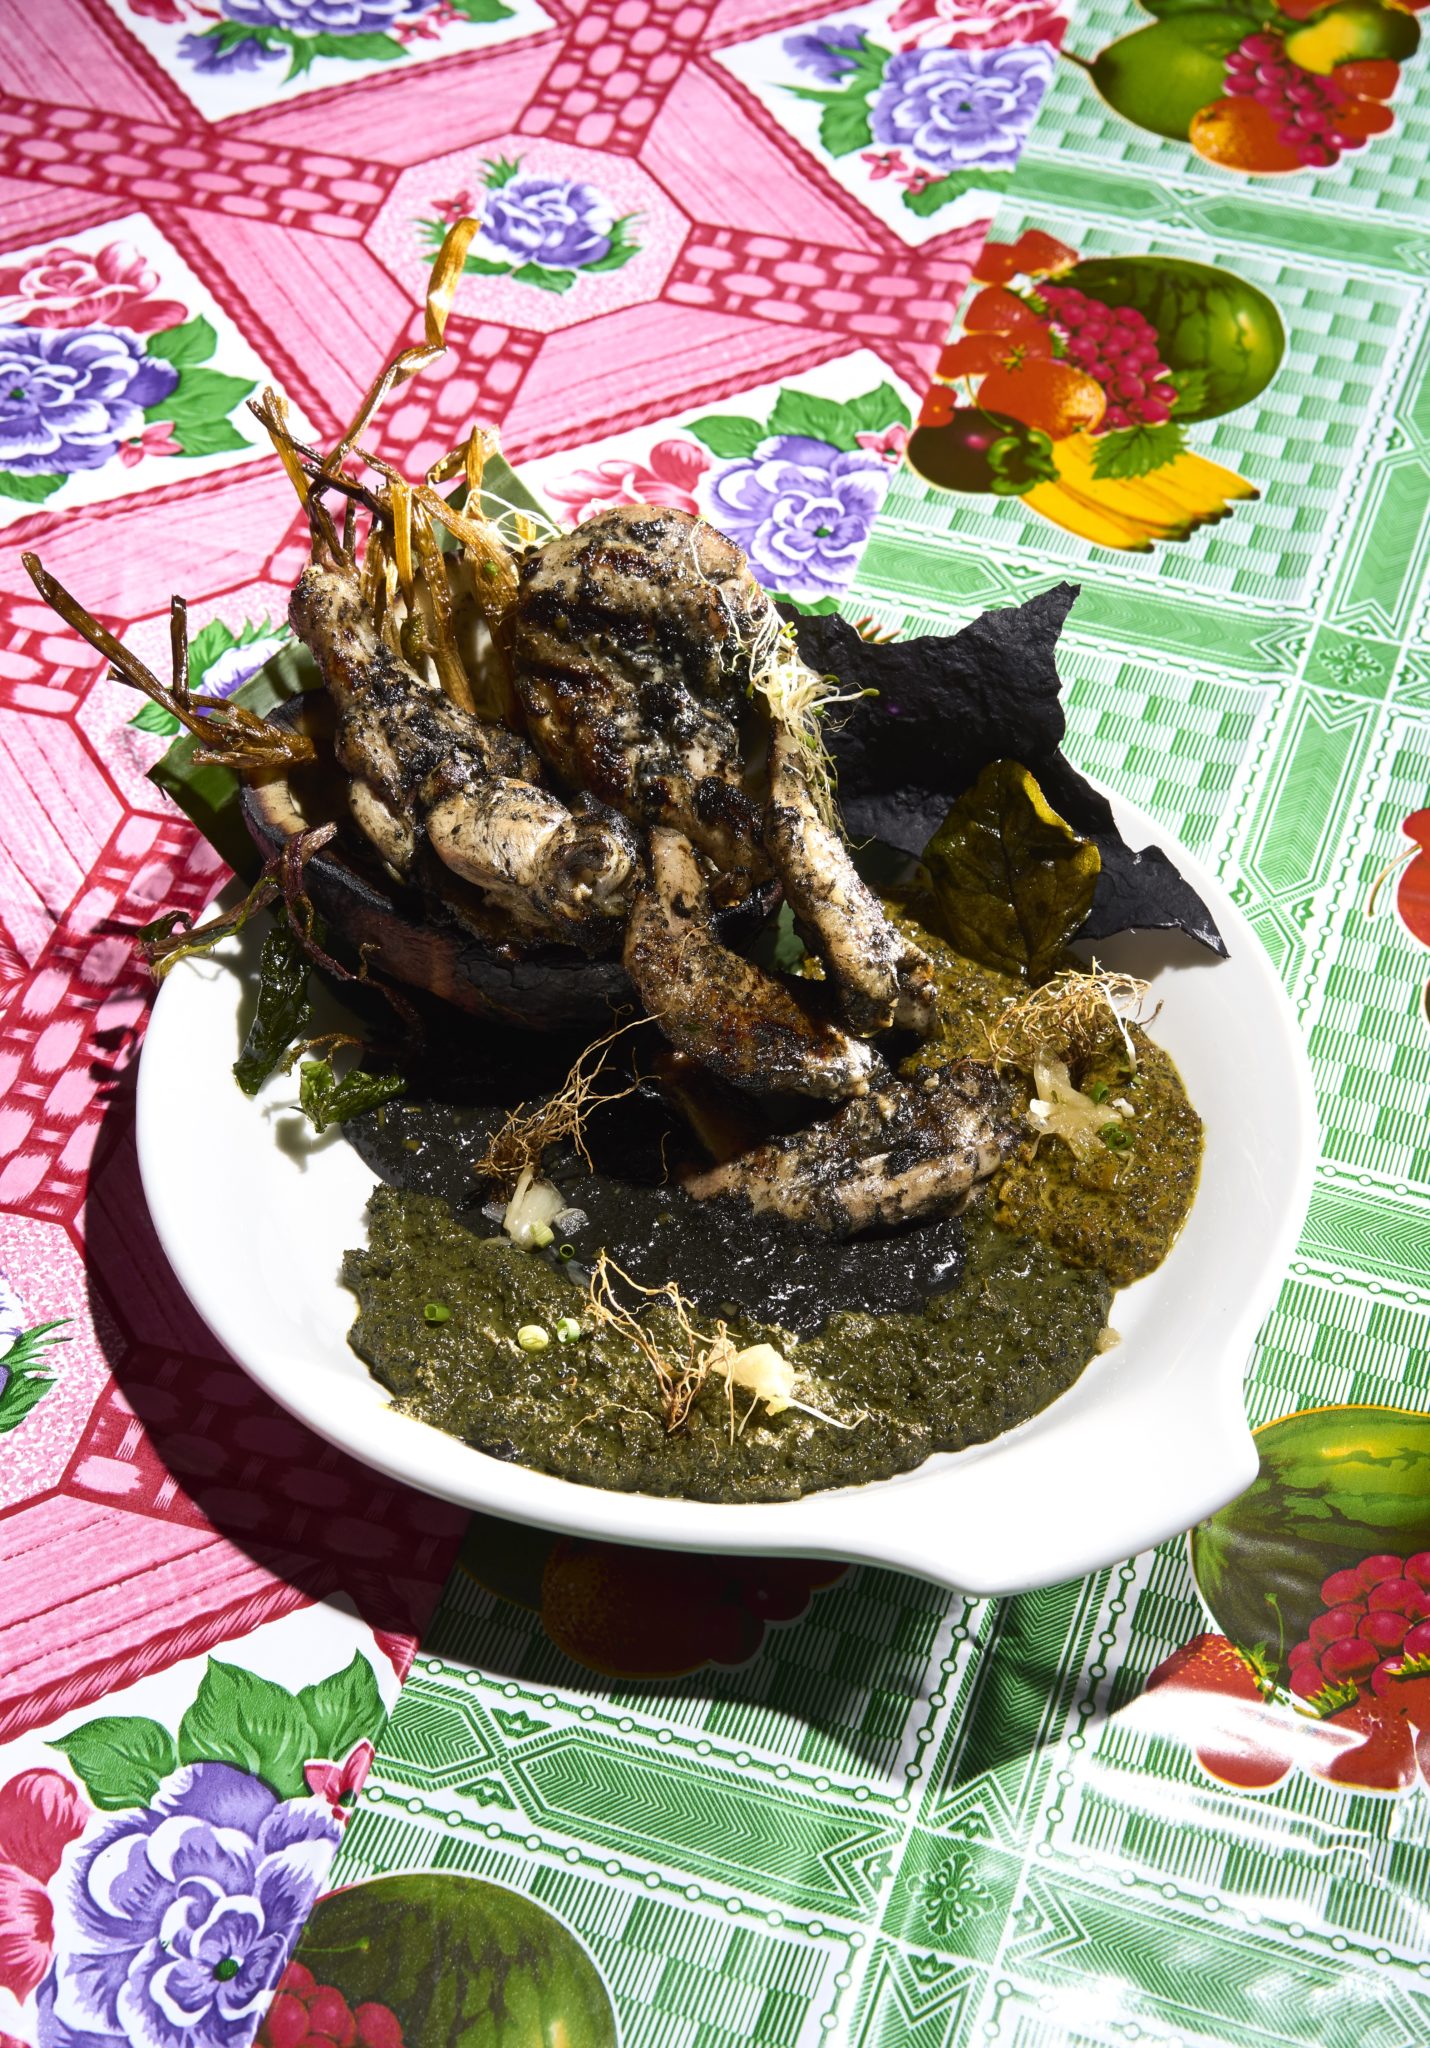 Piyanggang manok is a Tausug specialty where the chicken is marinated in a curry paste made from burnt coconut